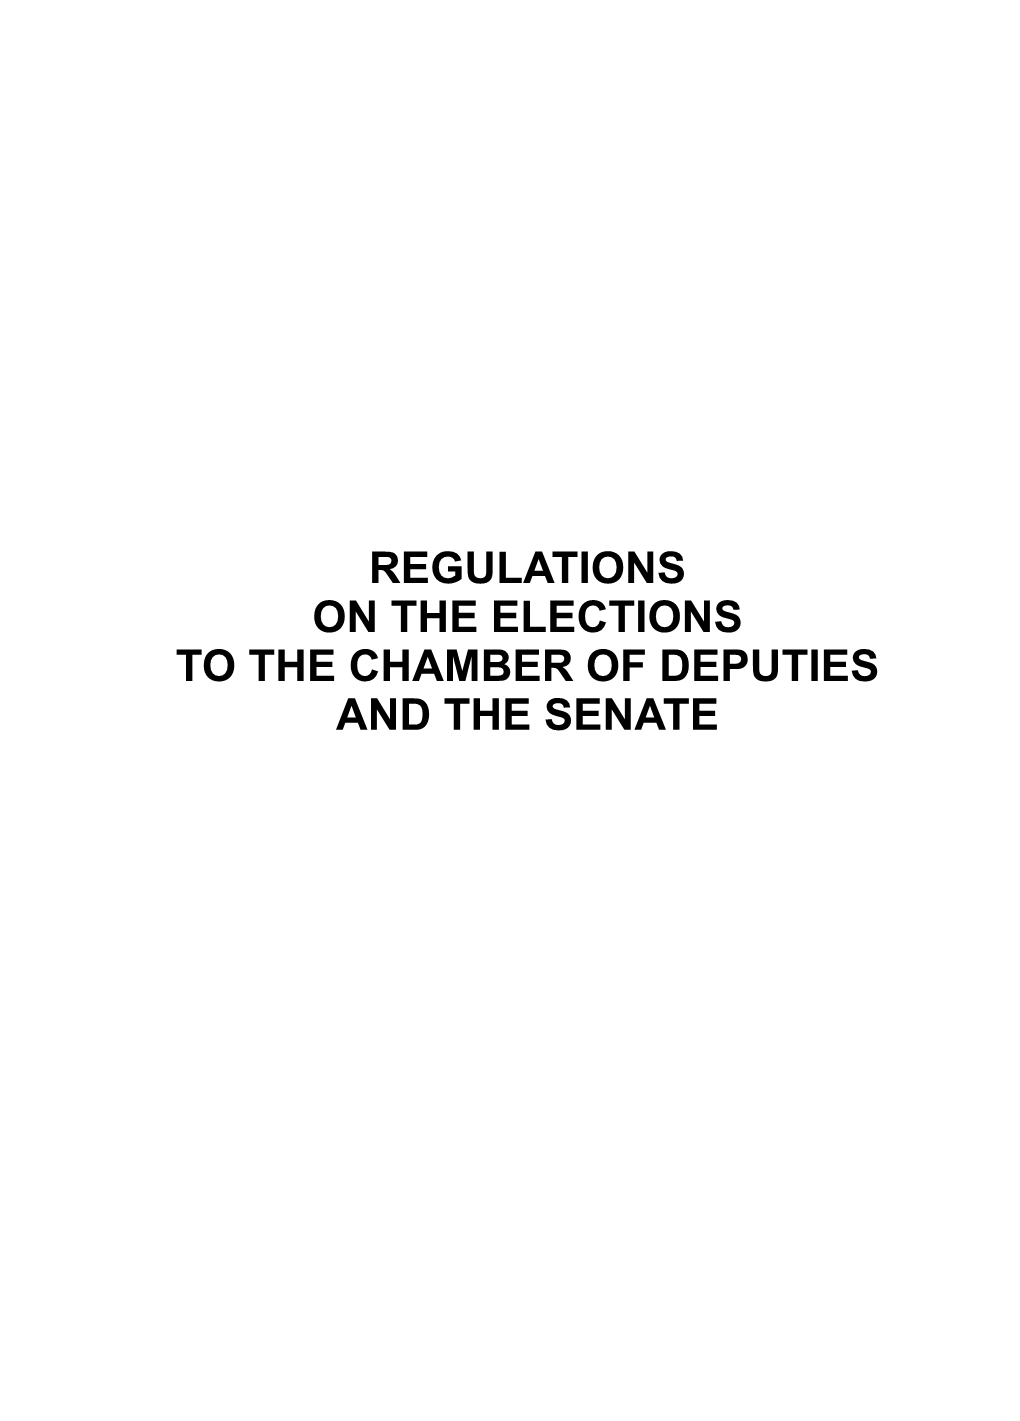 Regulations on the Elections to the Chamber of Deputies and the Senate Abbreviatio!S